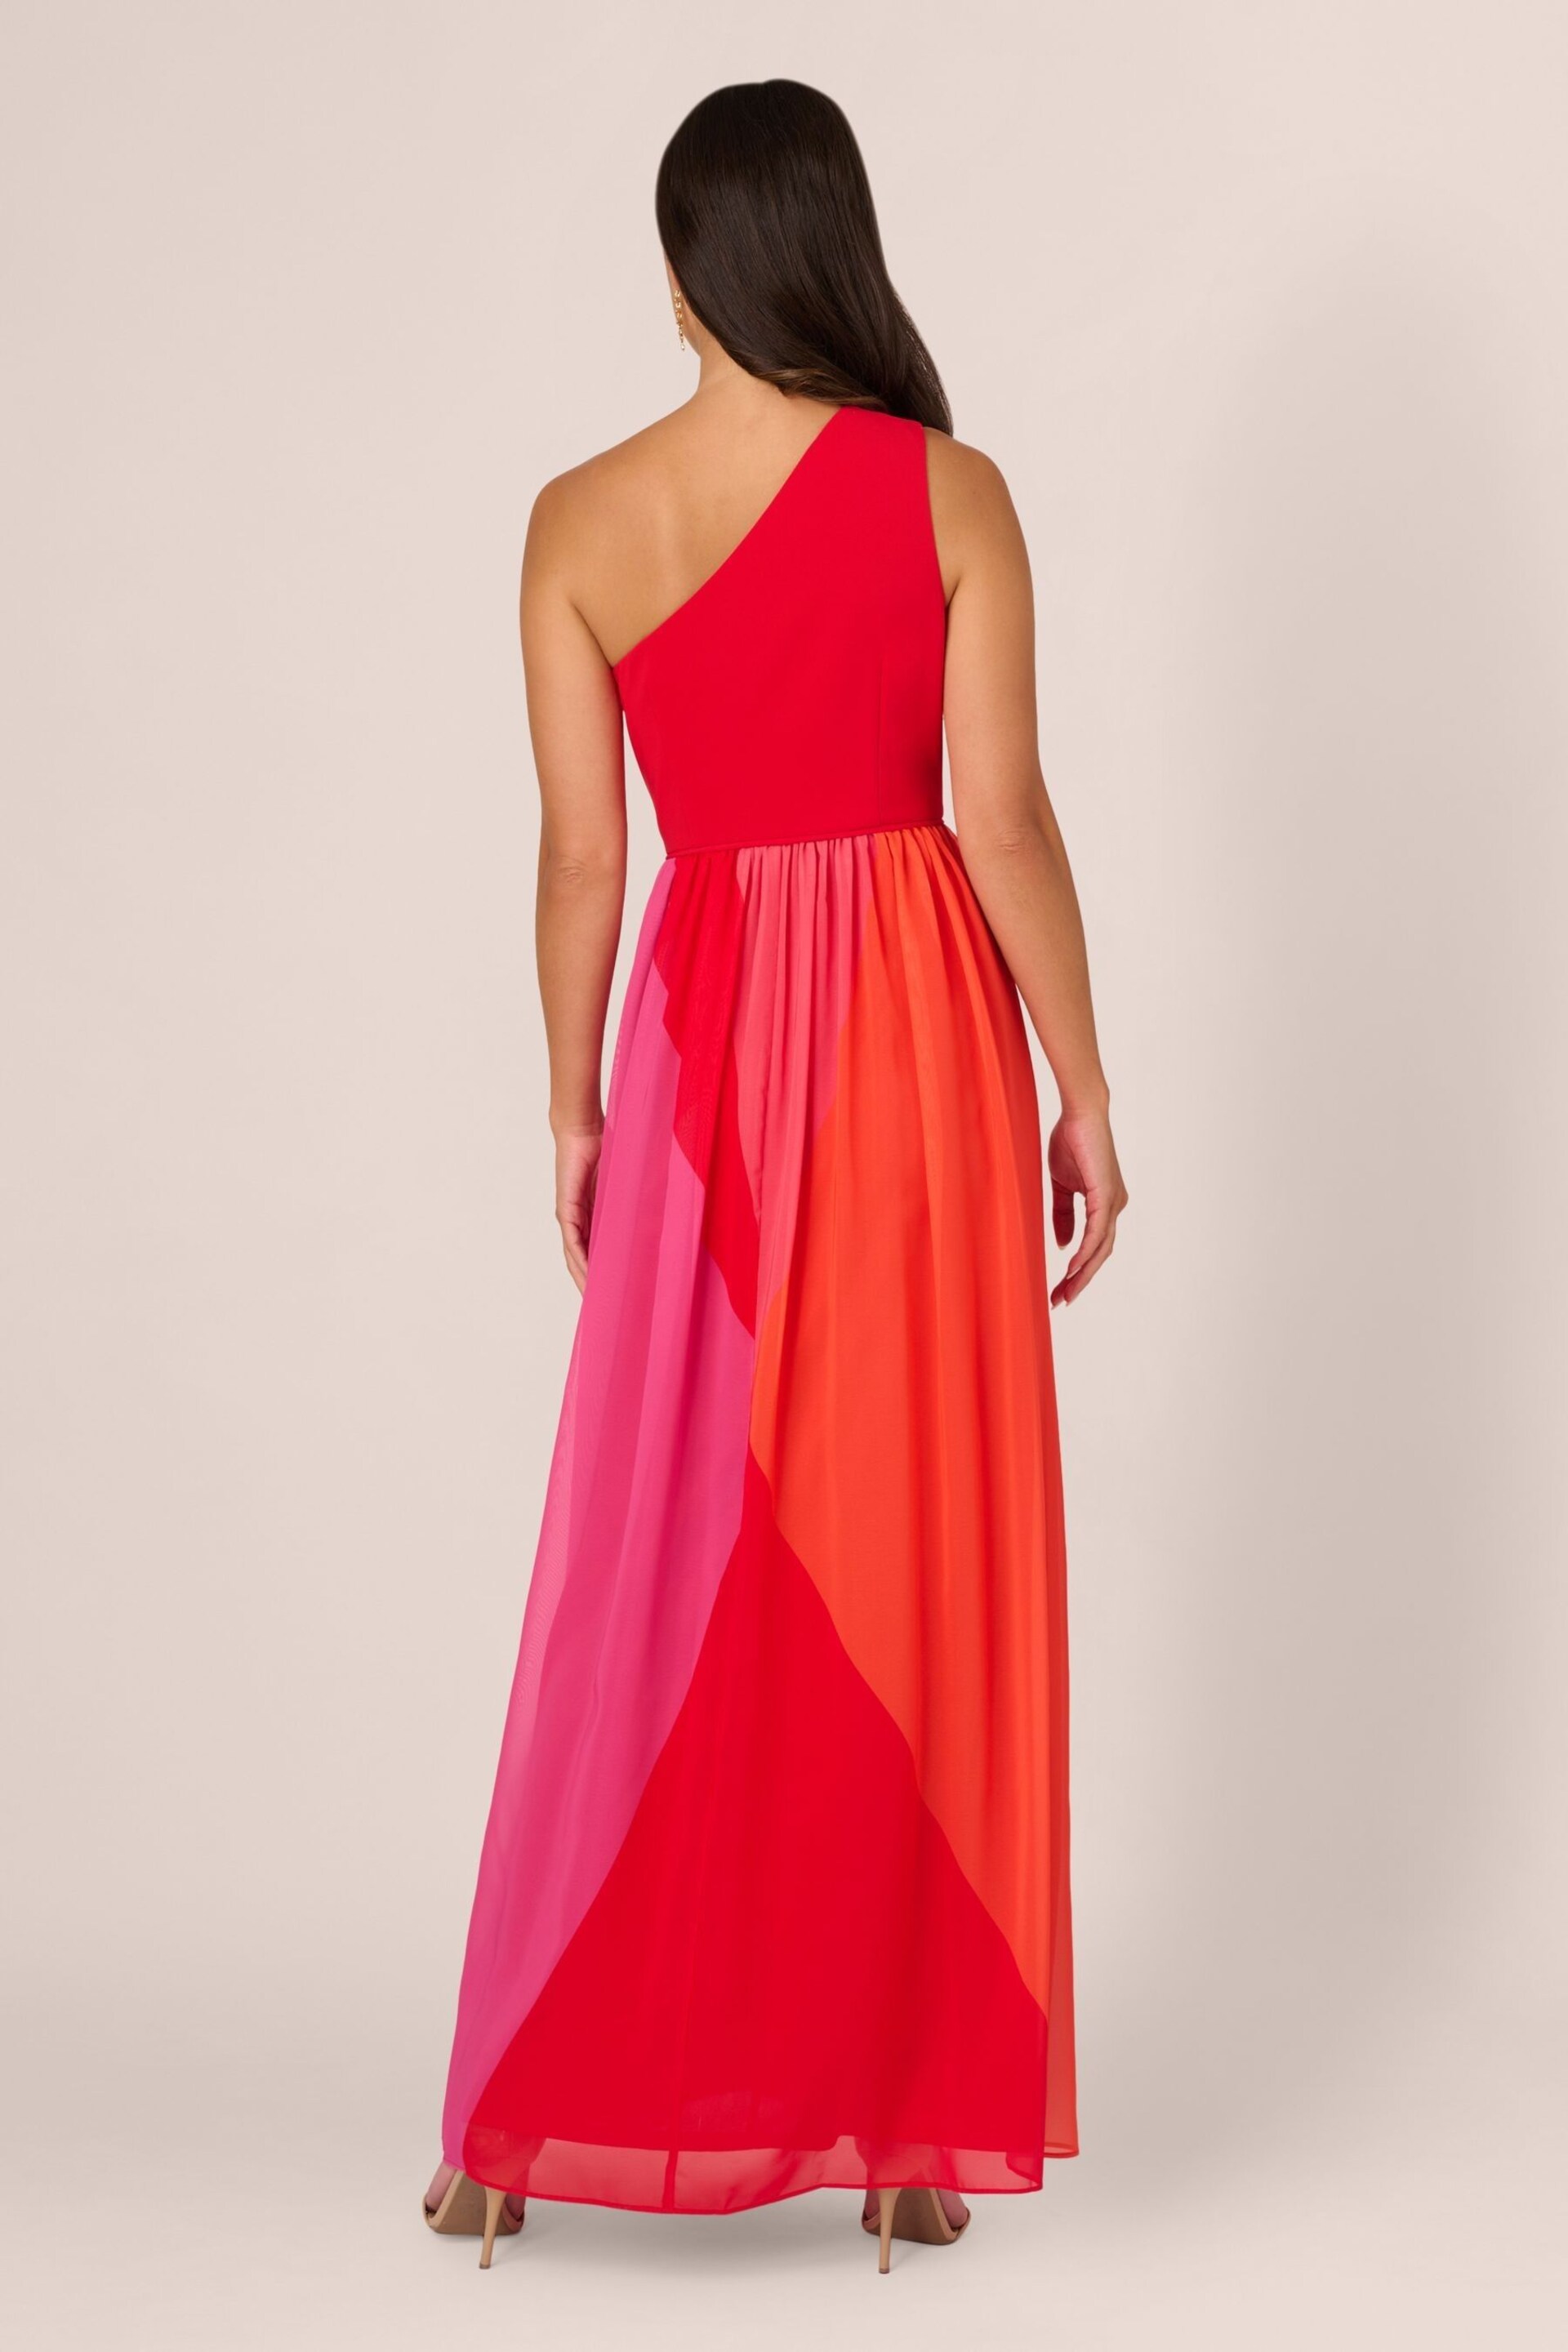 Adrianna Papell Red Color Block Chiffon Dress - Image 2 of 7